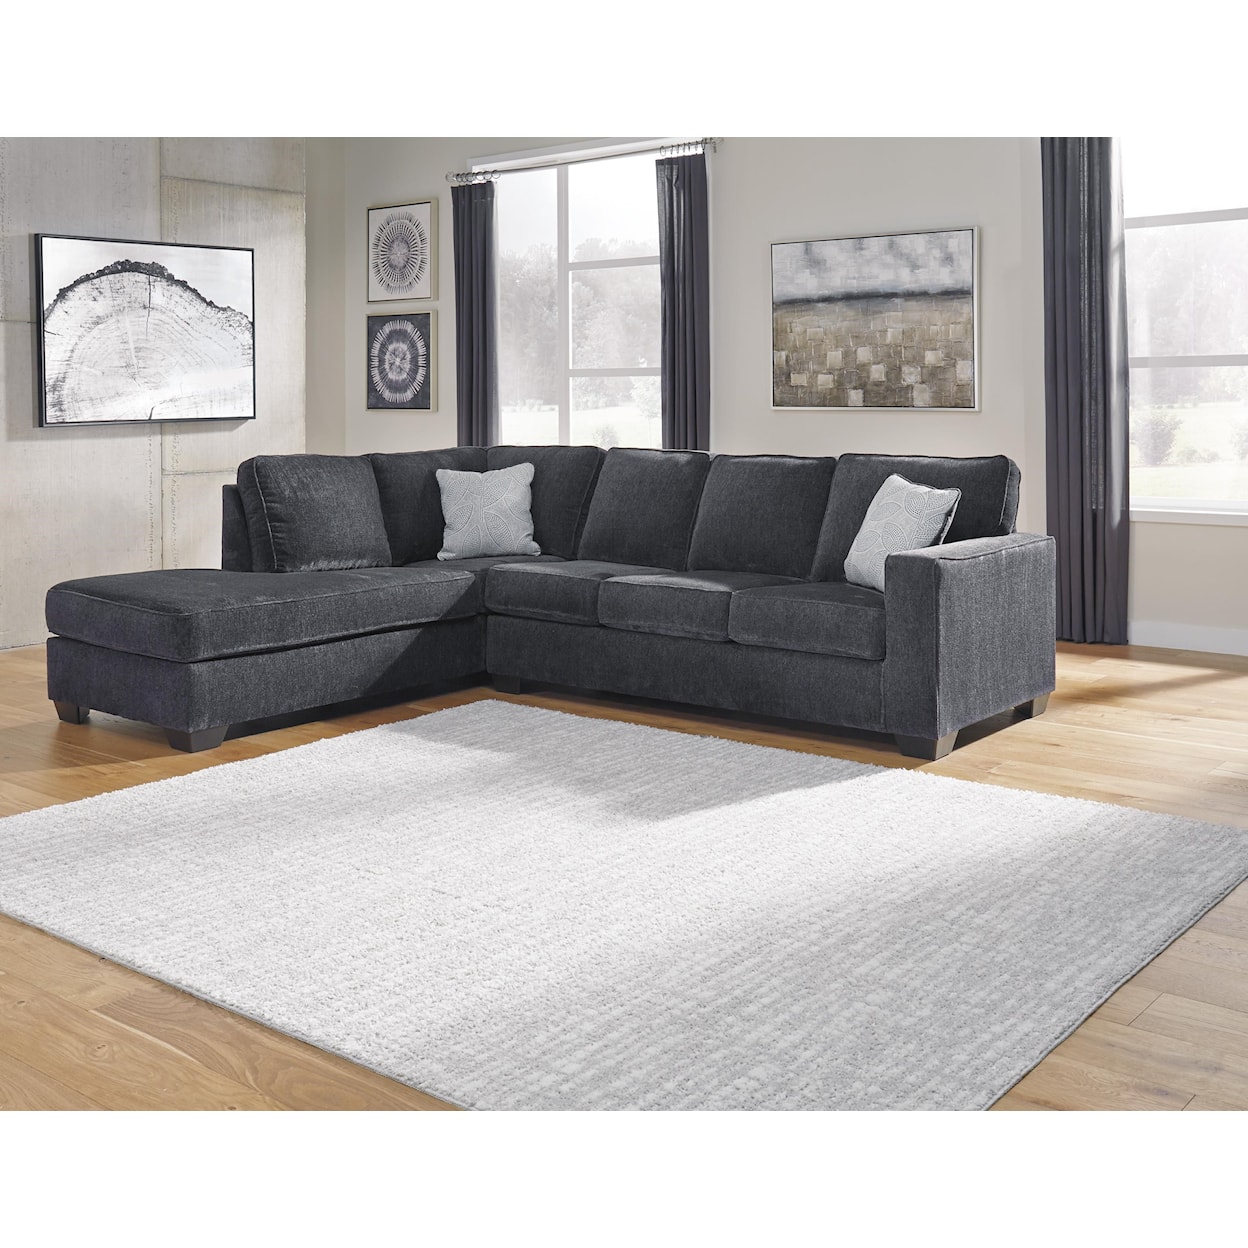 Signature Design by Ashley Altari 2 PC Sectional and Chair Set